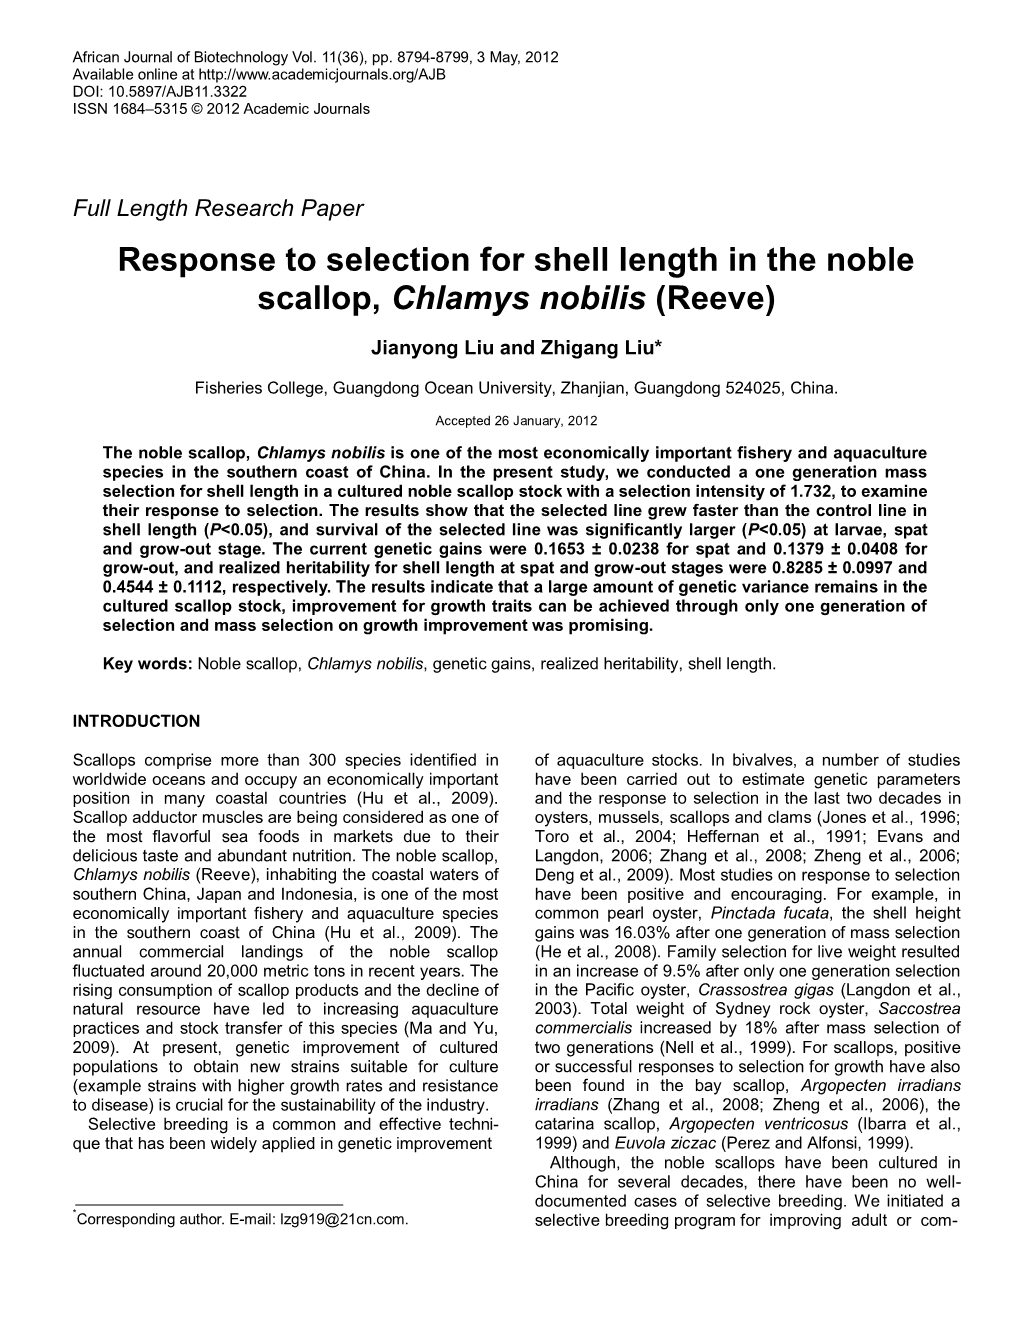 Response to Selection for Shell Length in the Noble Scallop, Chlamys Nobilis (Reeve)